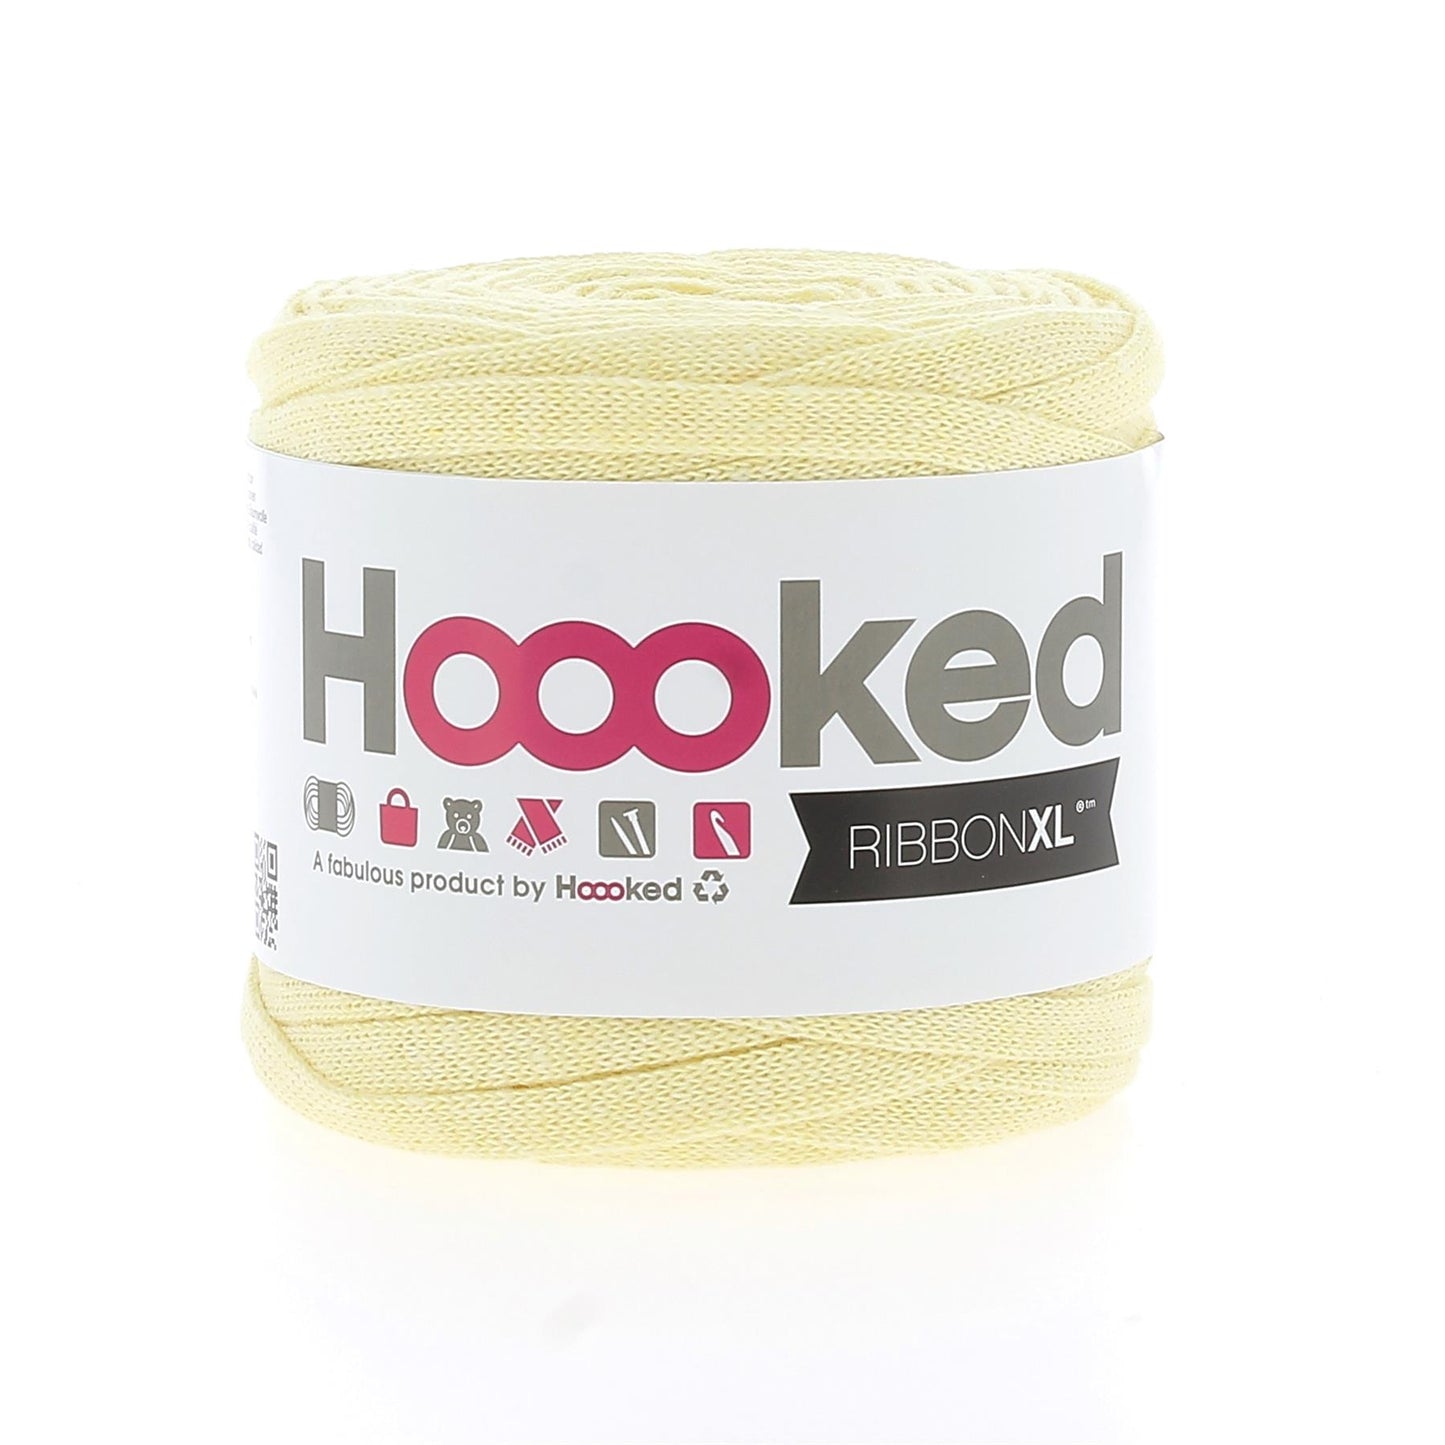 [Hoooked] RXL45MINI RibbonXL Frosted Cotton Yarn - 60M, 125g